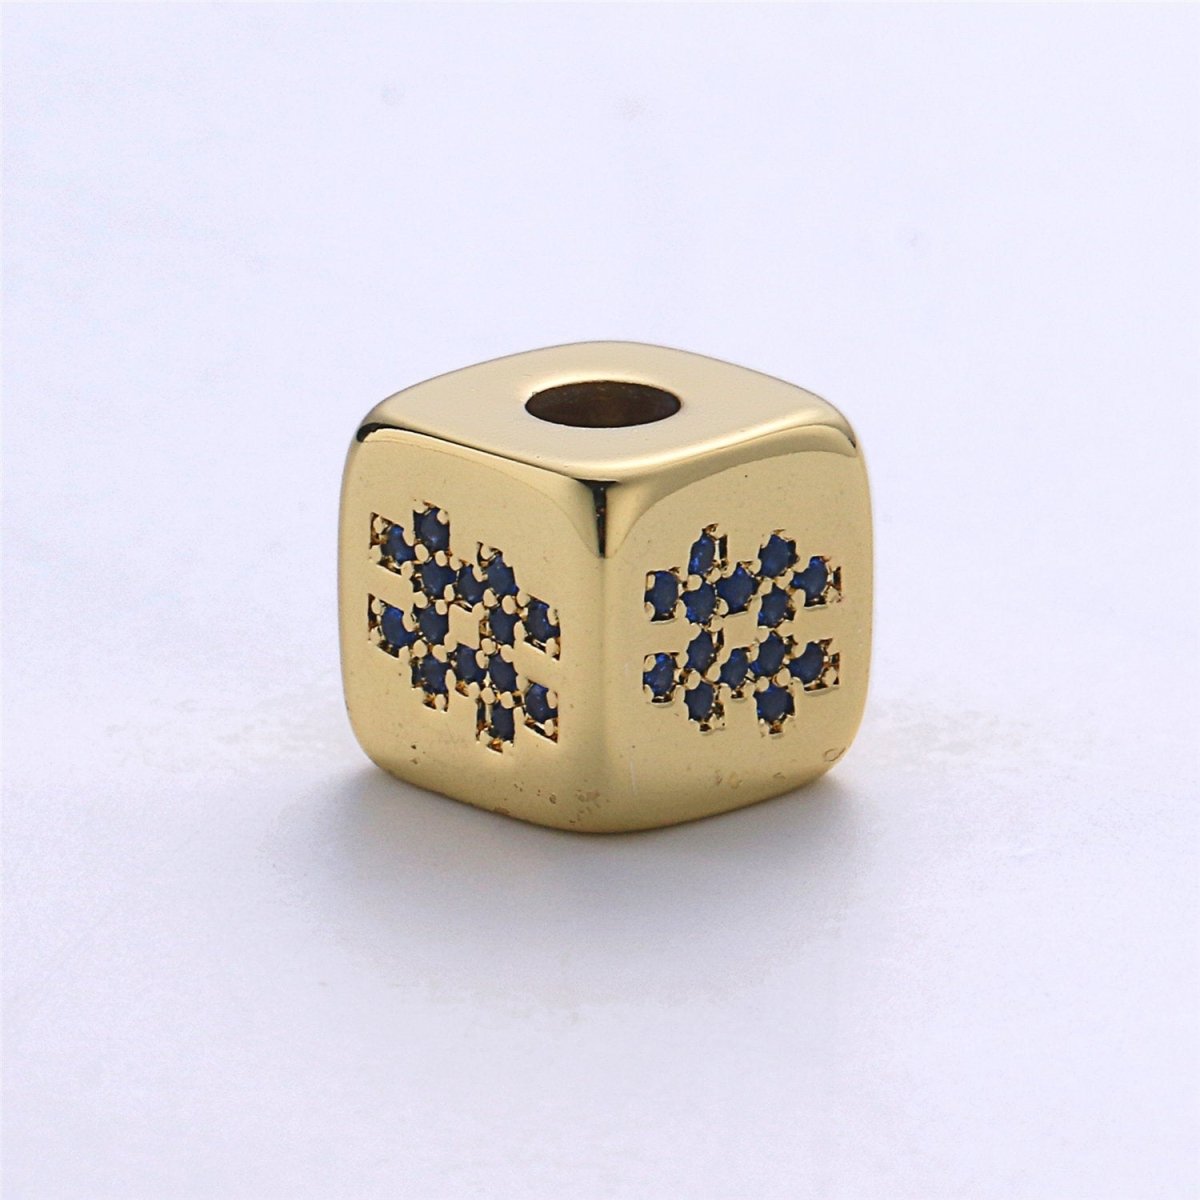 9mm Gold Filled Hashtag Bead # Bead for Bracelet Necklace Component Big Hole Bead 4mm Large Hole Bead B-253 - DLUXCA